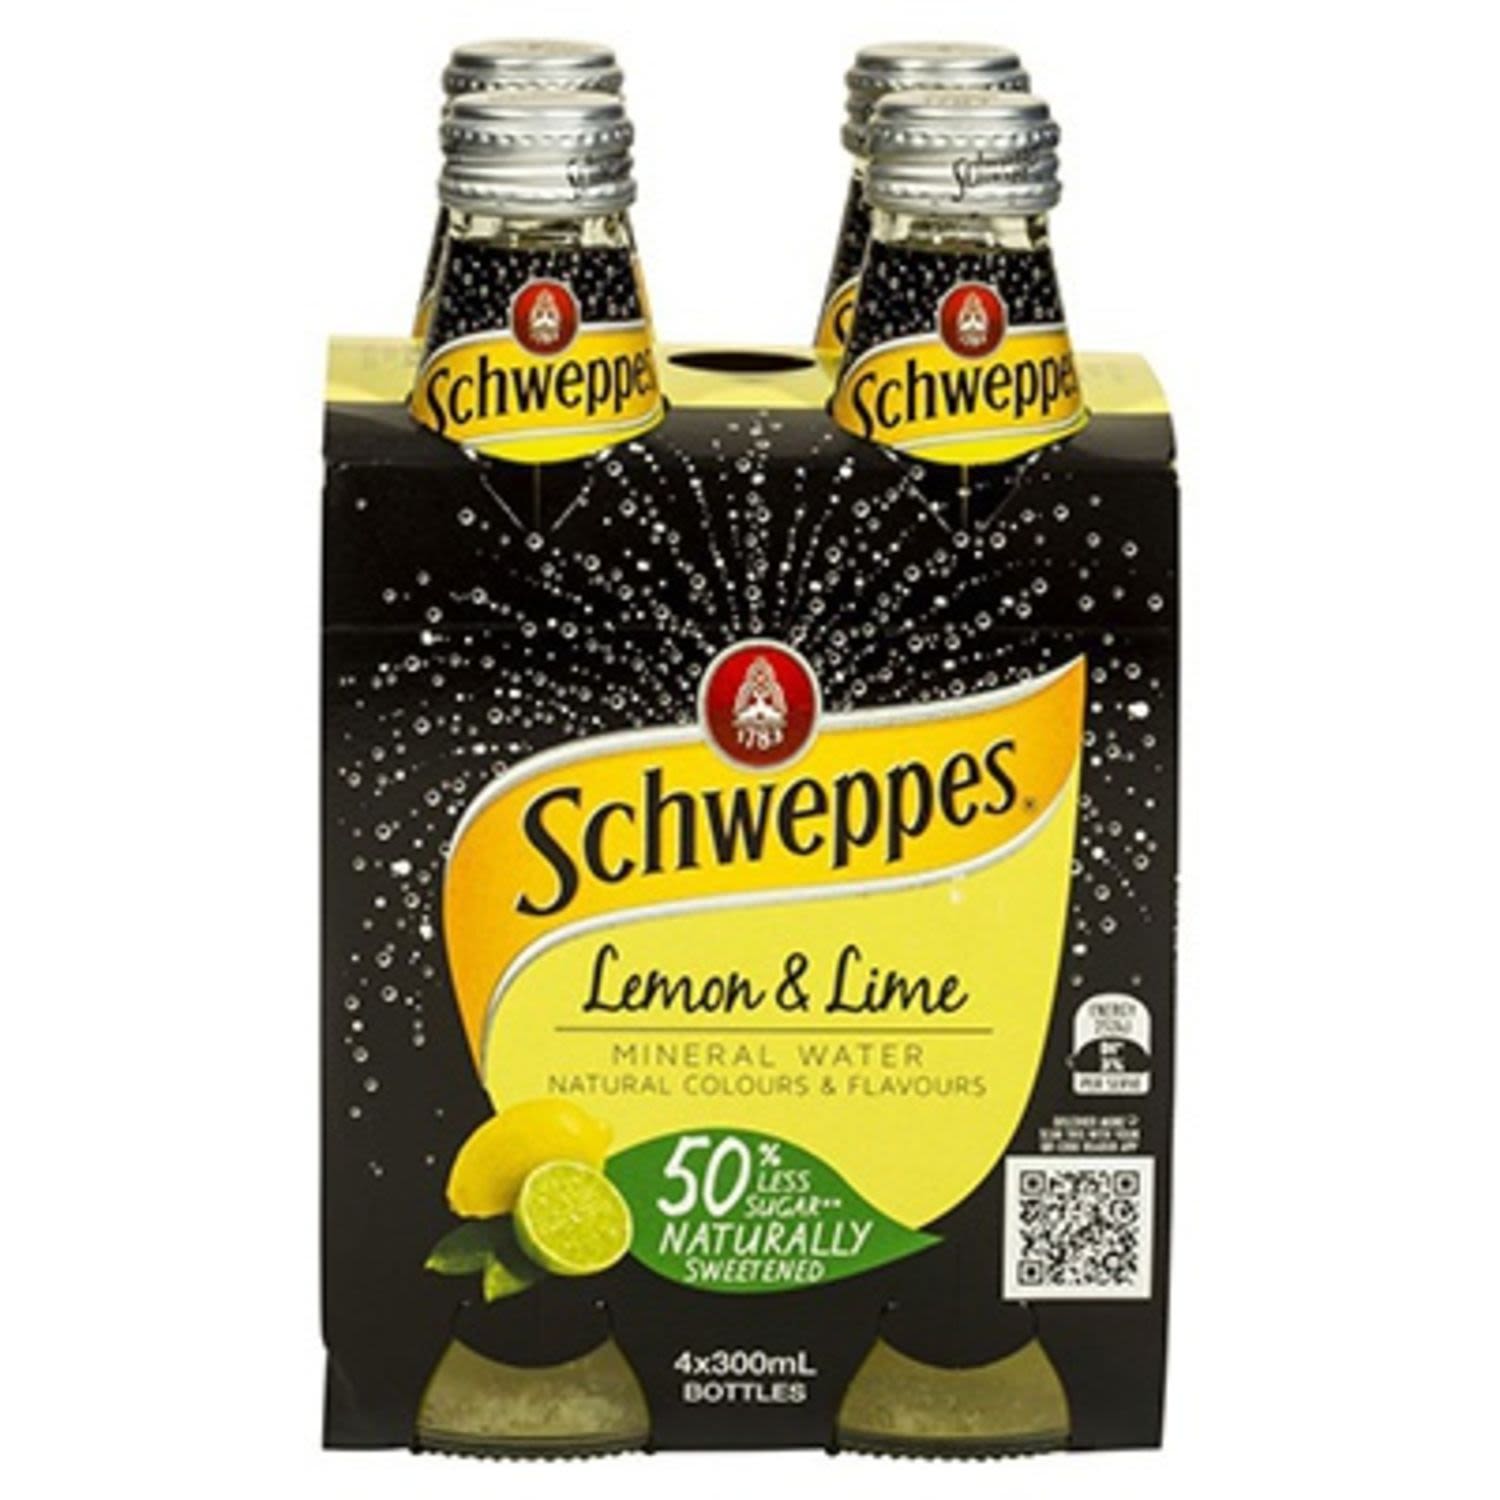 Schweppes Lemon & Lime with Natural Mineral Water 300ml, 4 Each